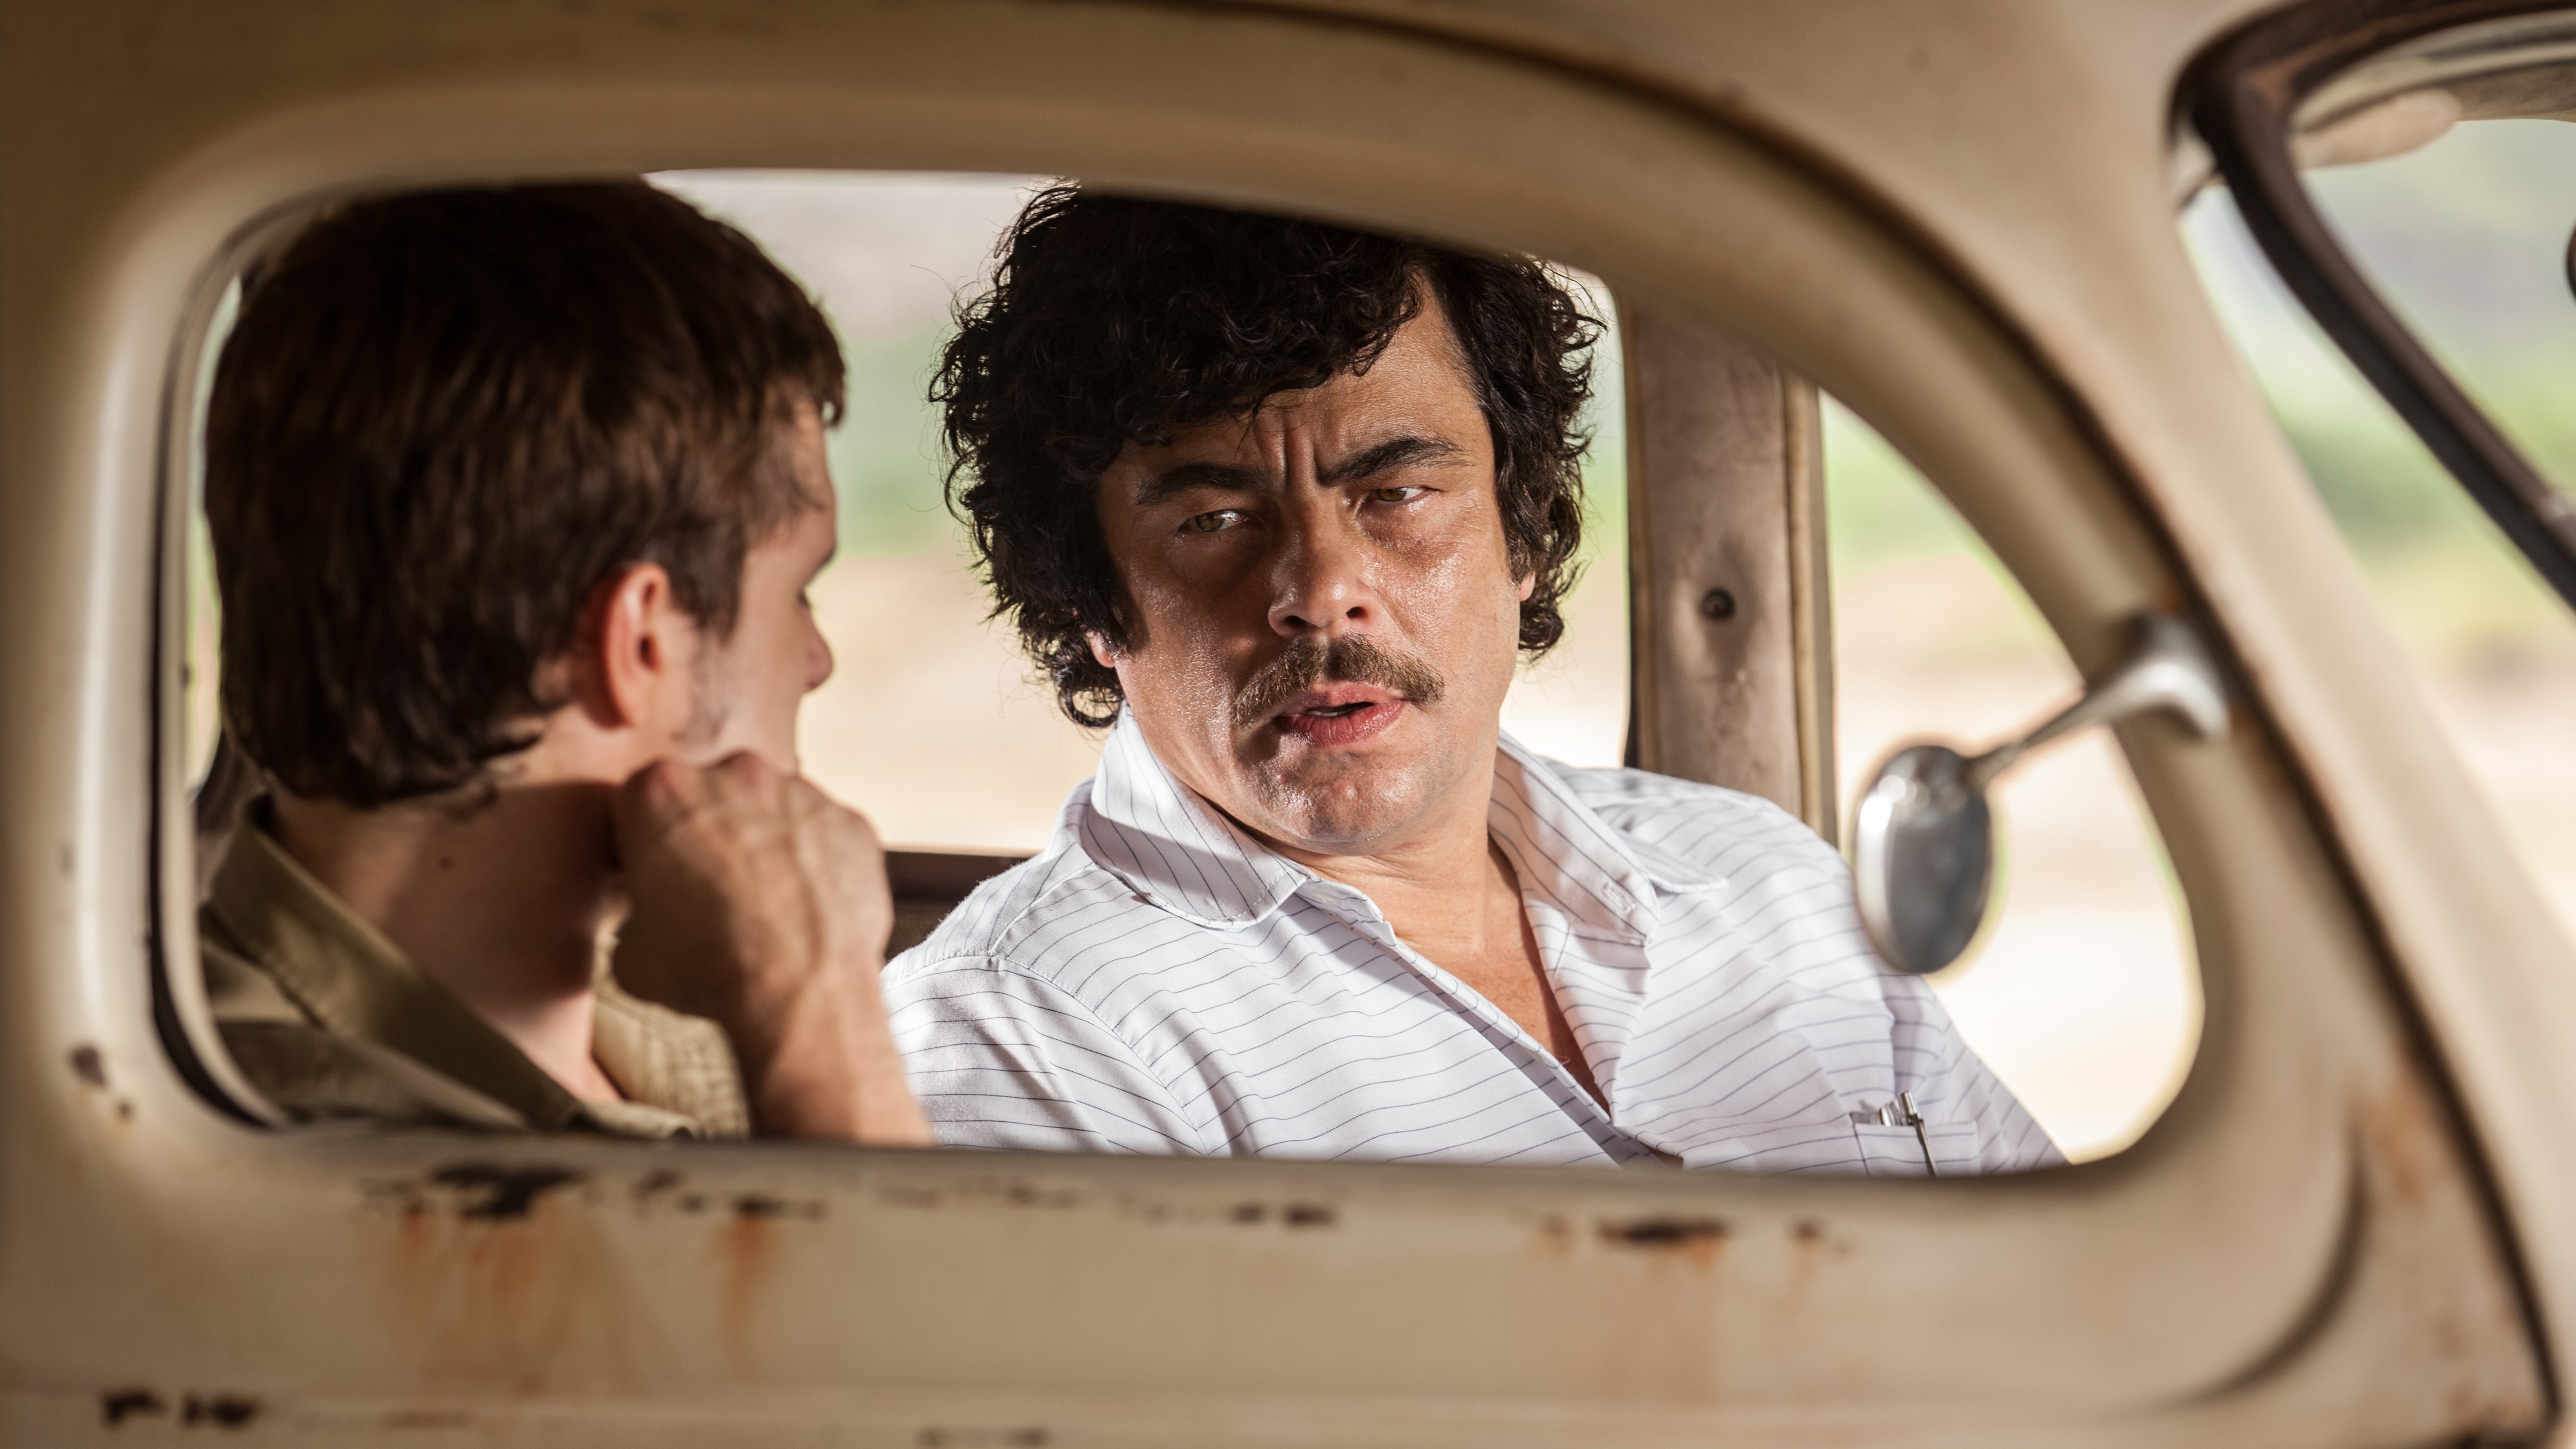 Escobar Paradise Lost: Is There a Real Life Inspiration Behind the 2014 Movie?